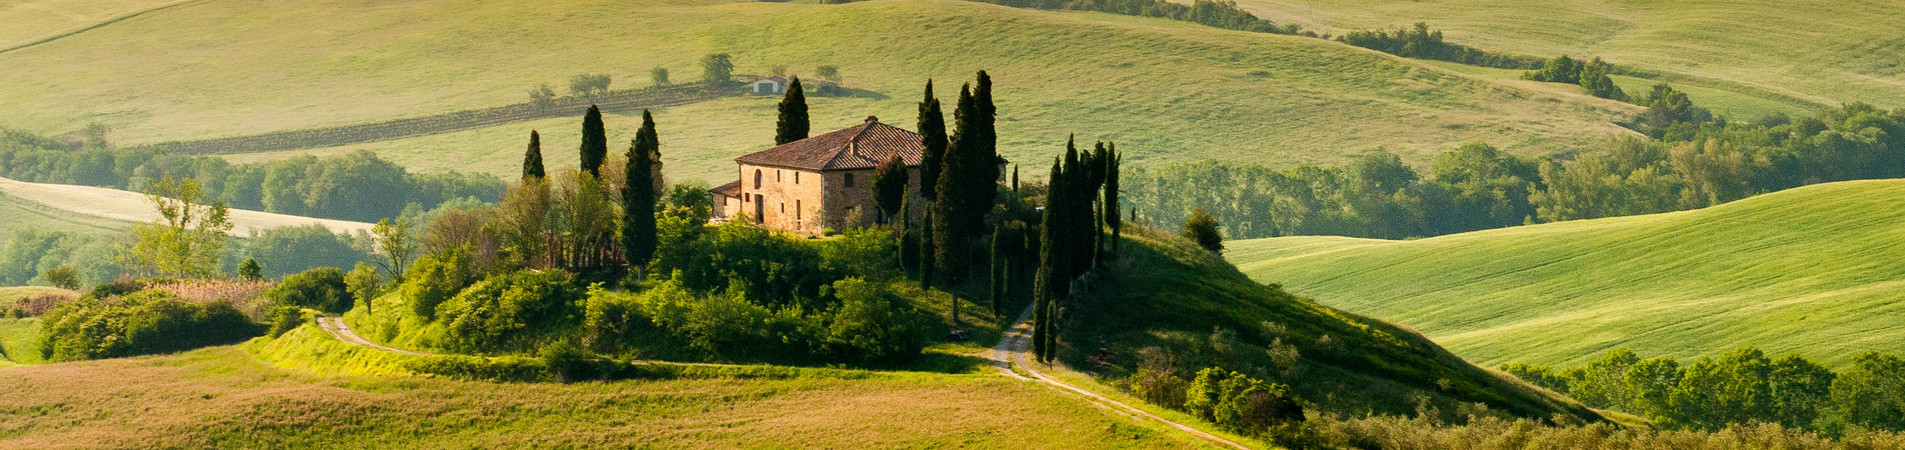 Luxury house in Tuscany